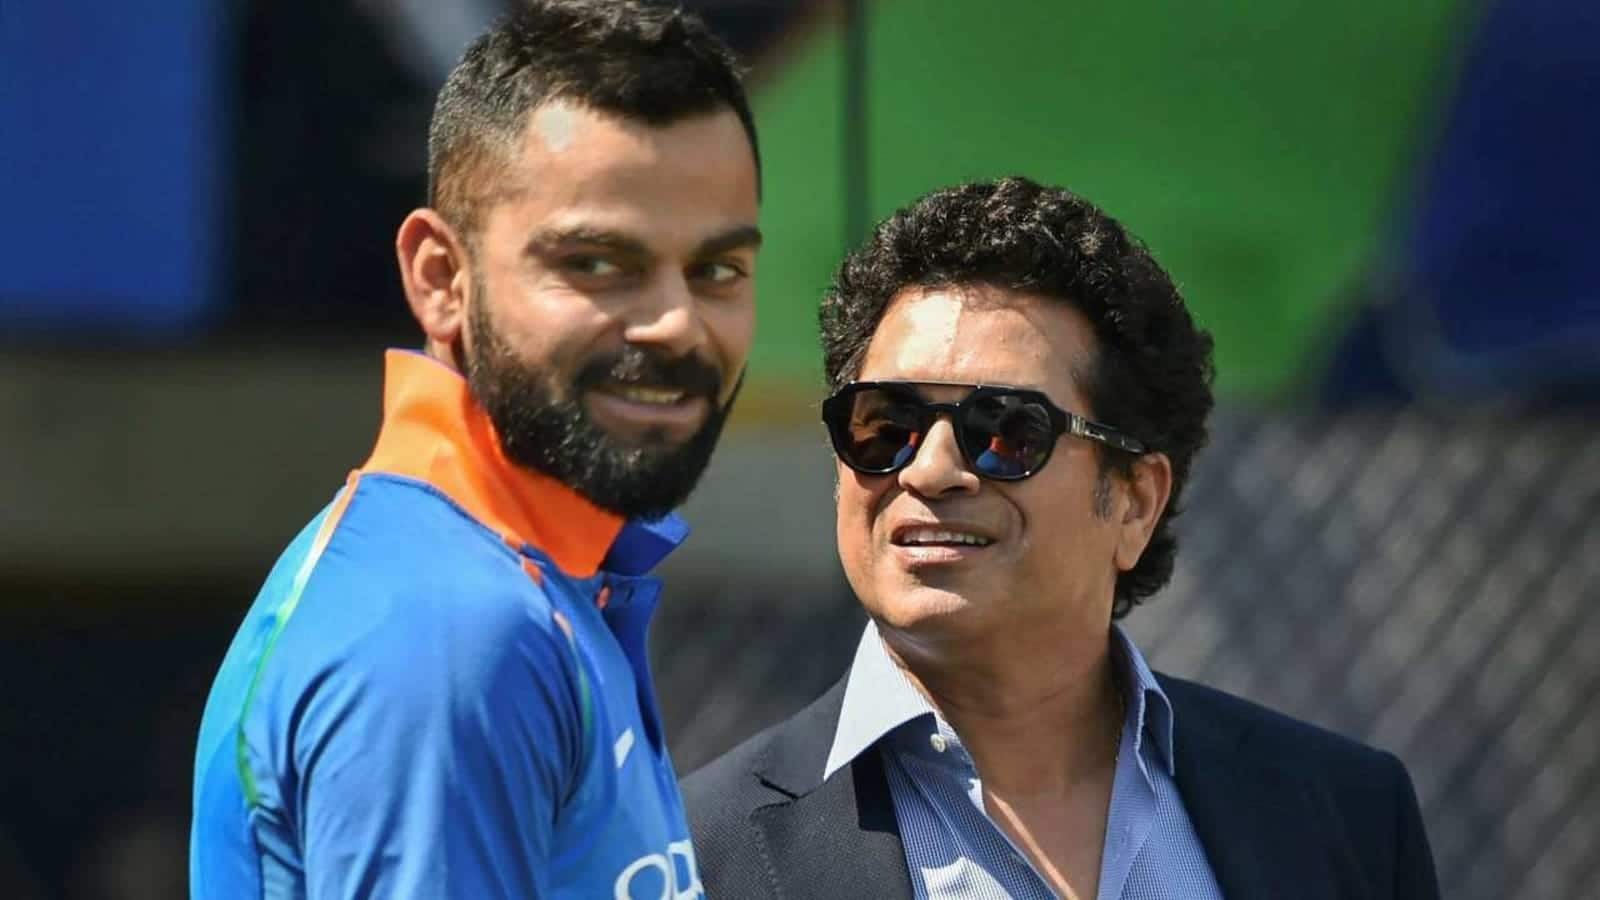 Over-taking Sachin's record in Tests will be Kohli's biggest challenge: Former India cricketer